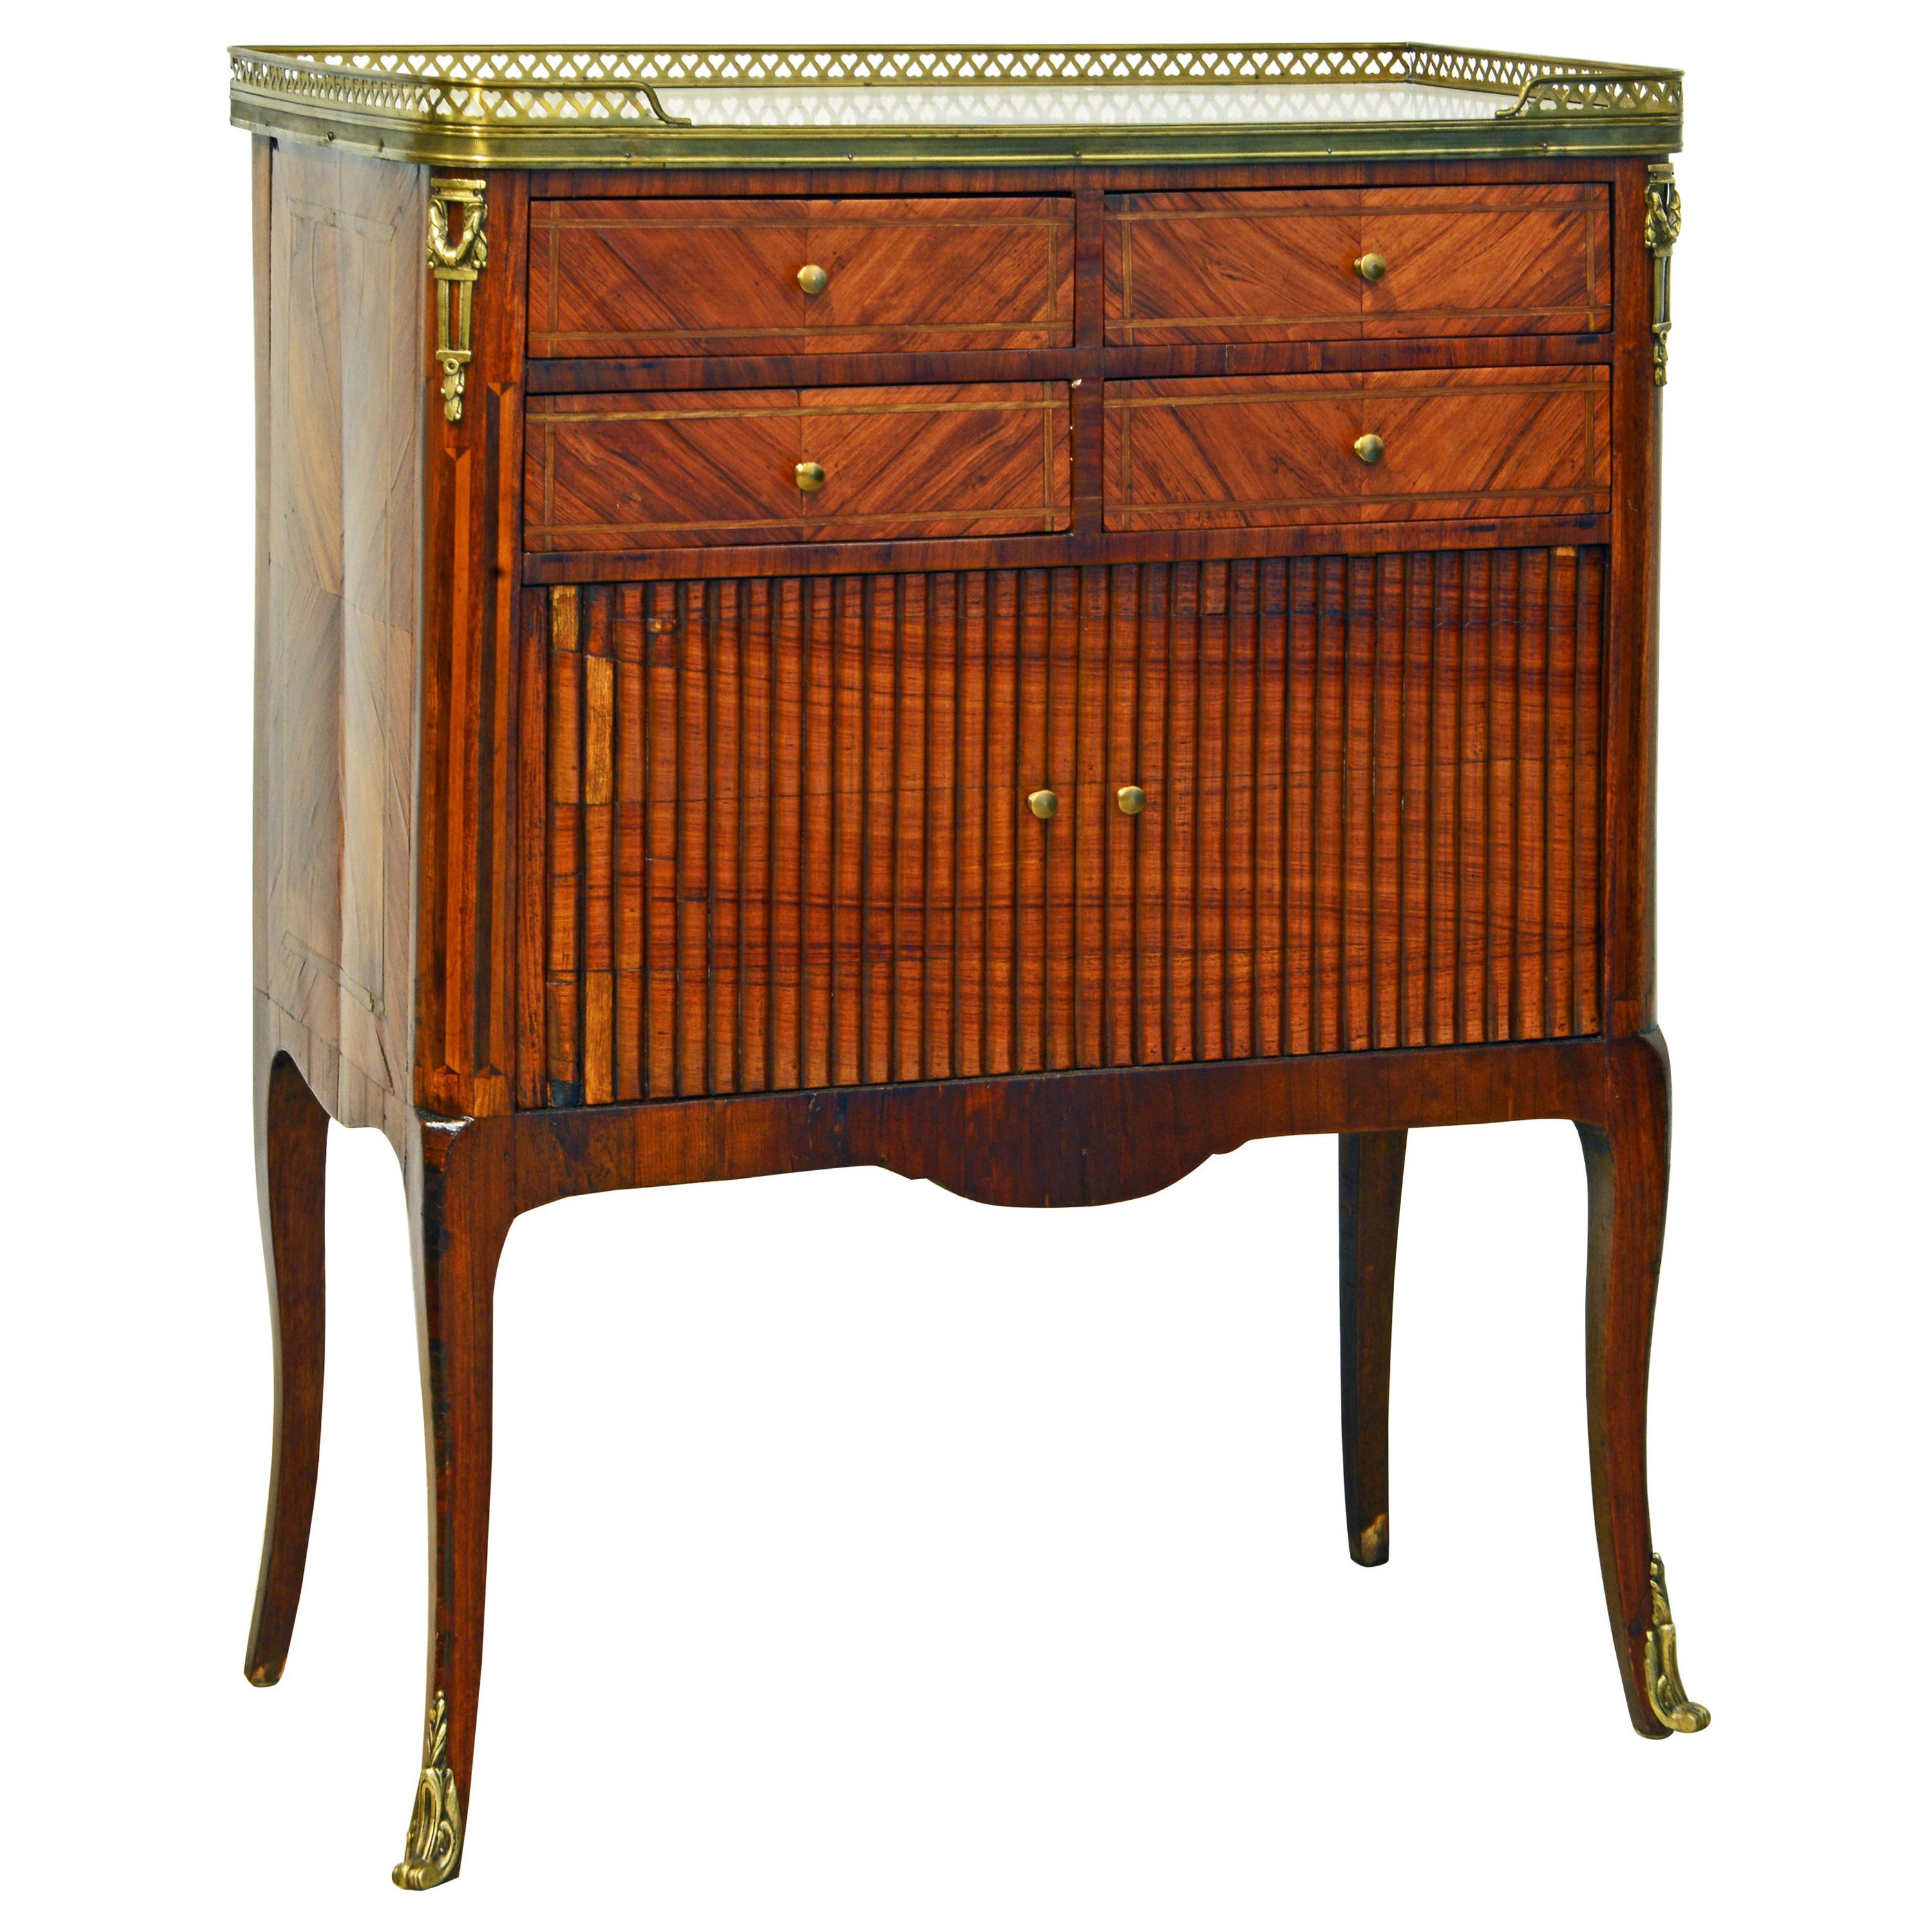 French Ormolu Mounted Parquetry Marble-Top Four-Drawer Tambour Door Commode